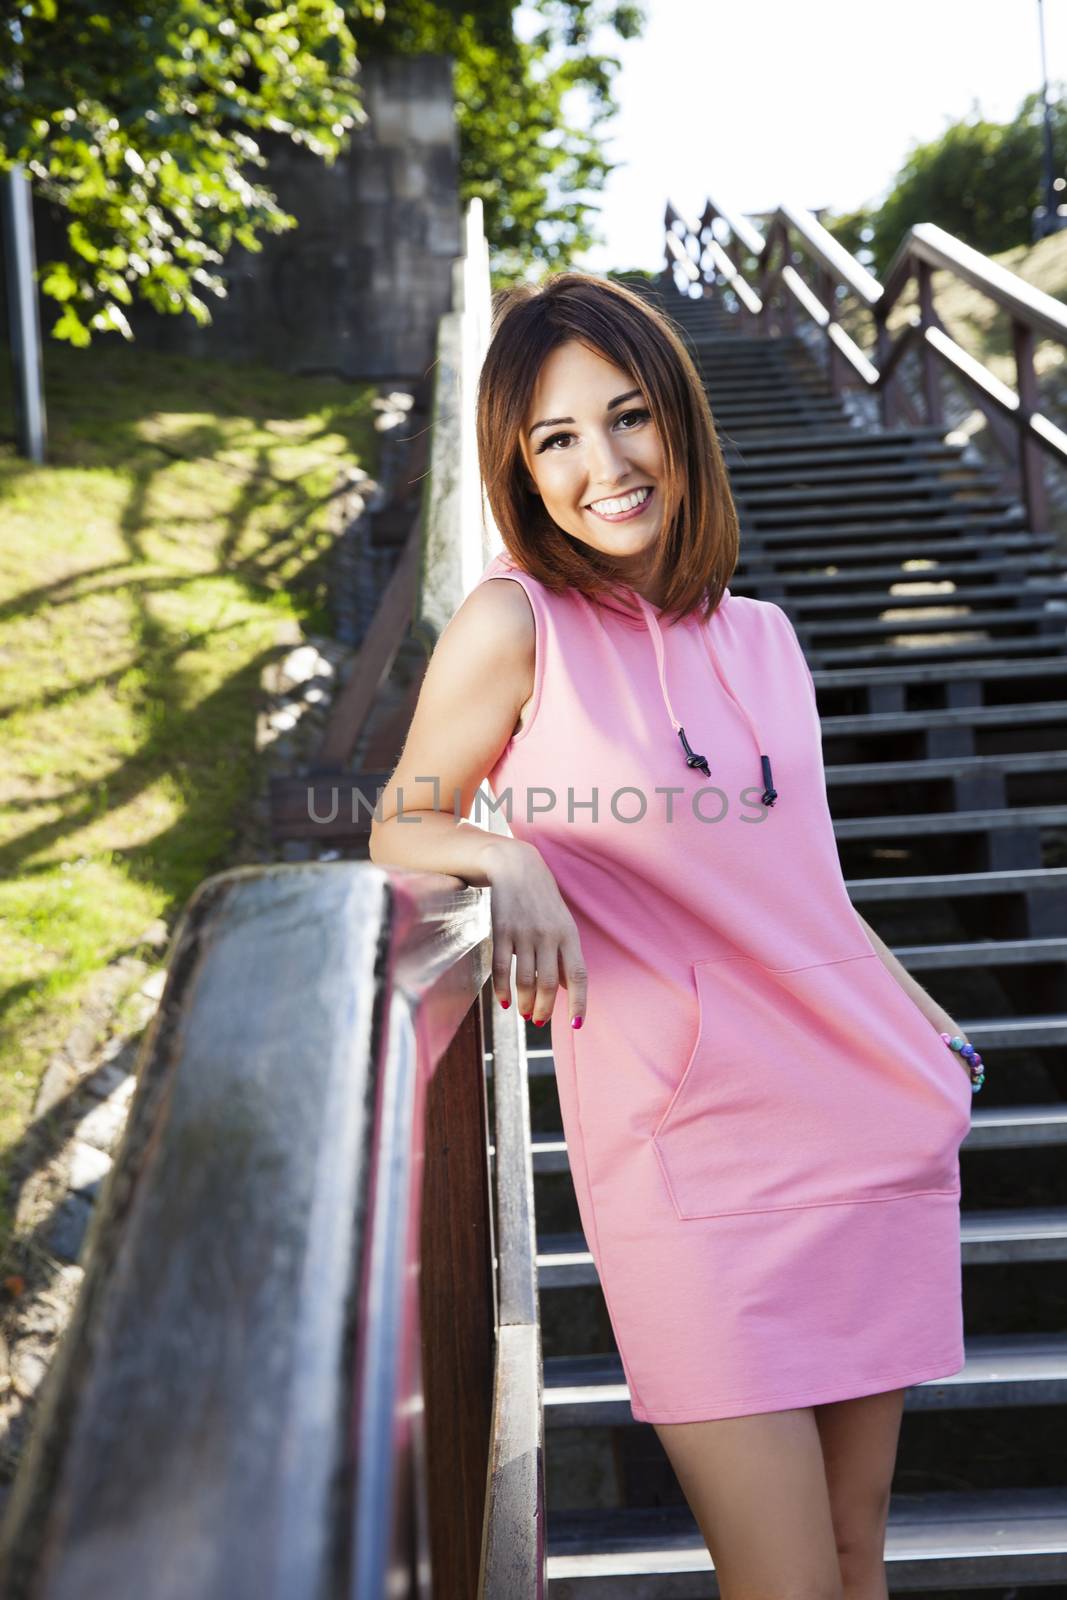 Cheerful tourist woman is standing on the steps and smiling to camera.